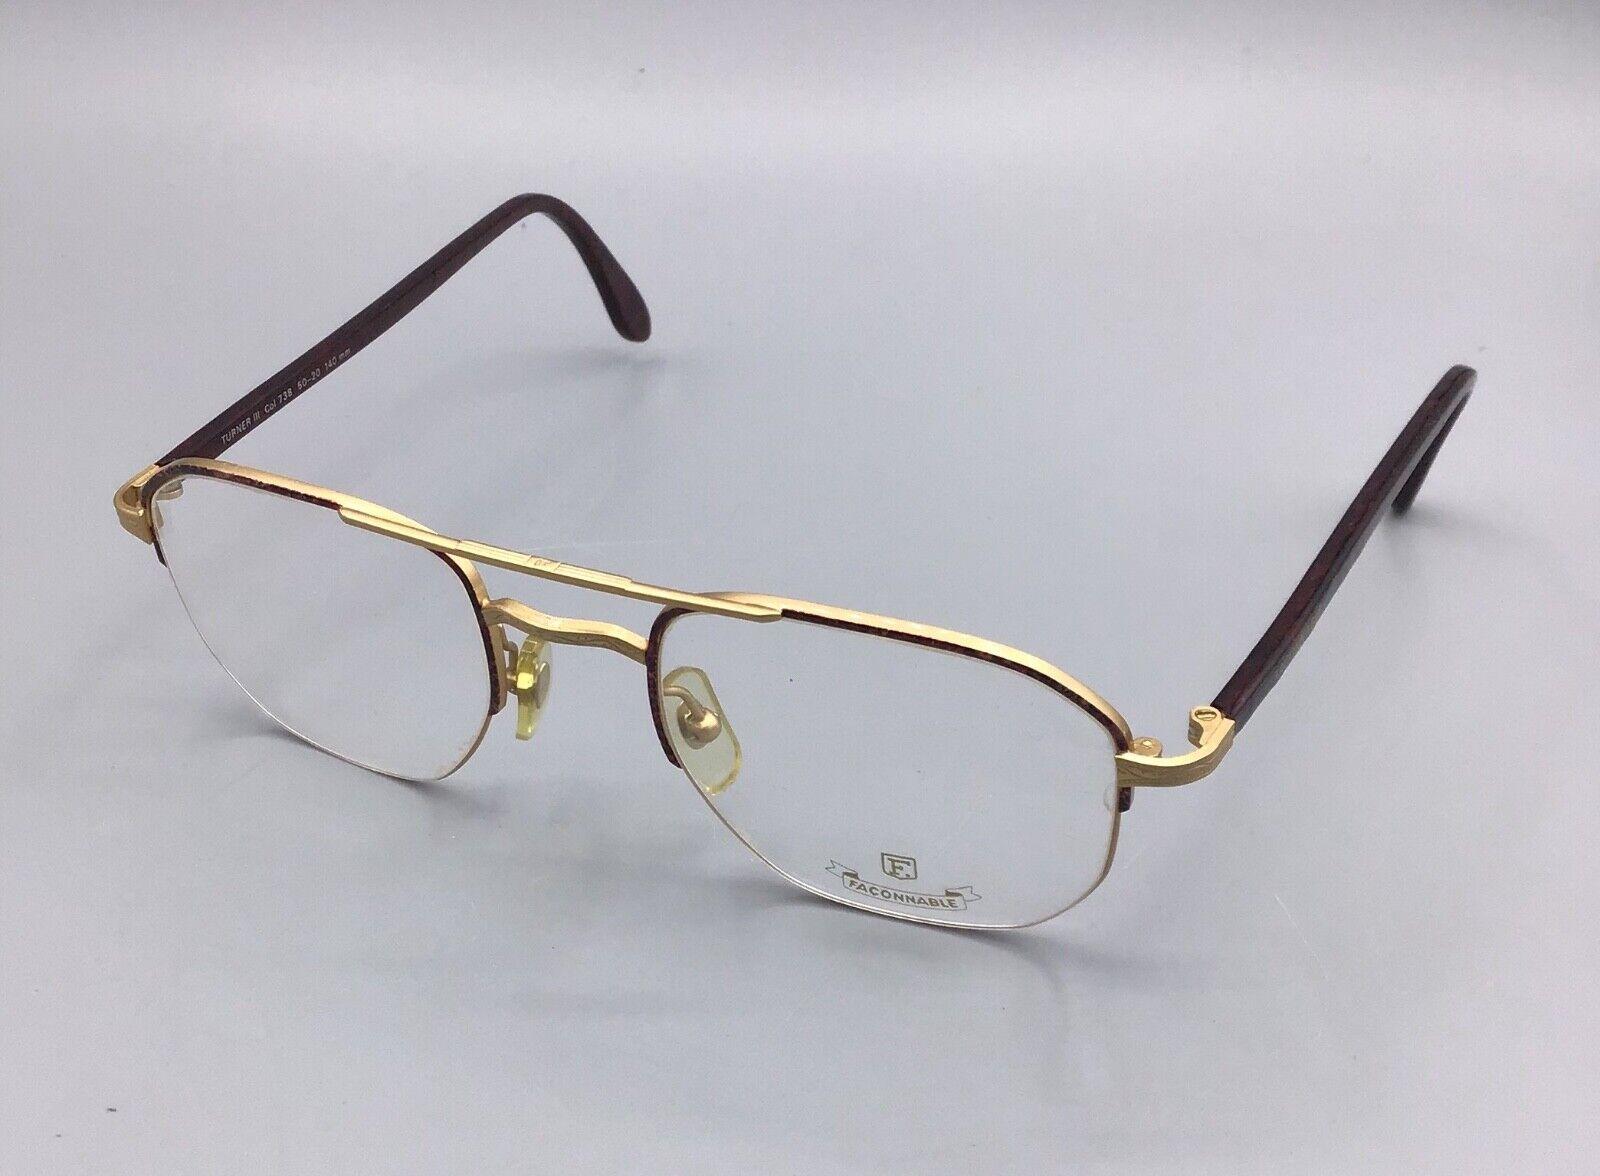 Faconnable occhiale vintage hand Made in France lunettes Eyewear glasses